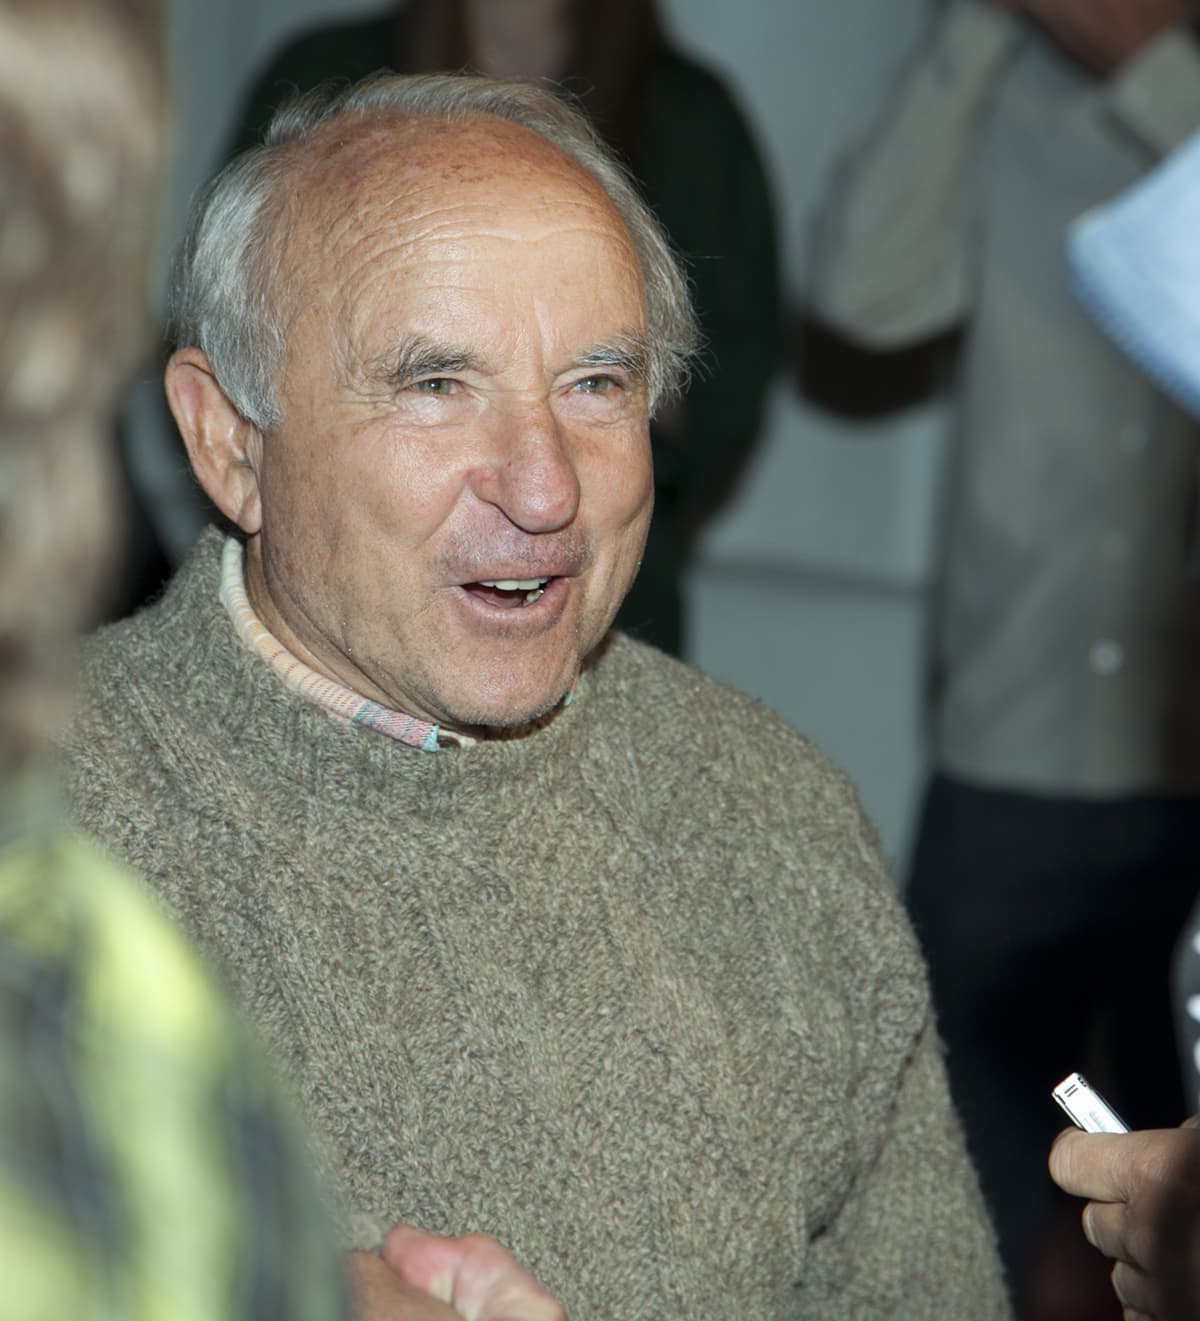 Yvon Chouinard, a rock climber, environmentalist, and philanthropist, founded Patagonia in 1973